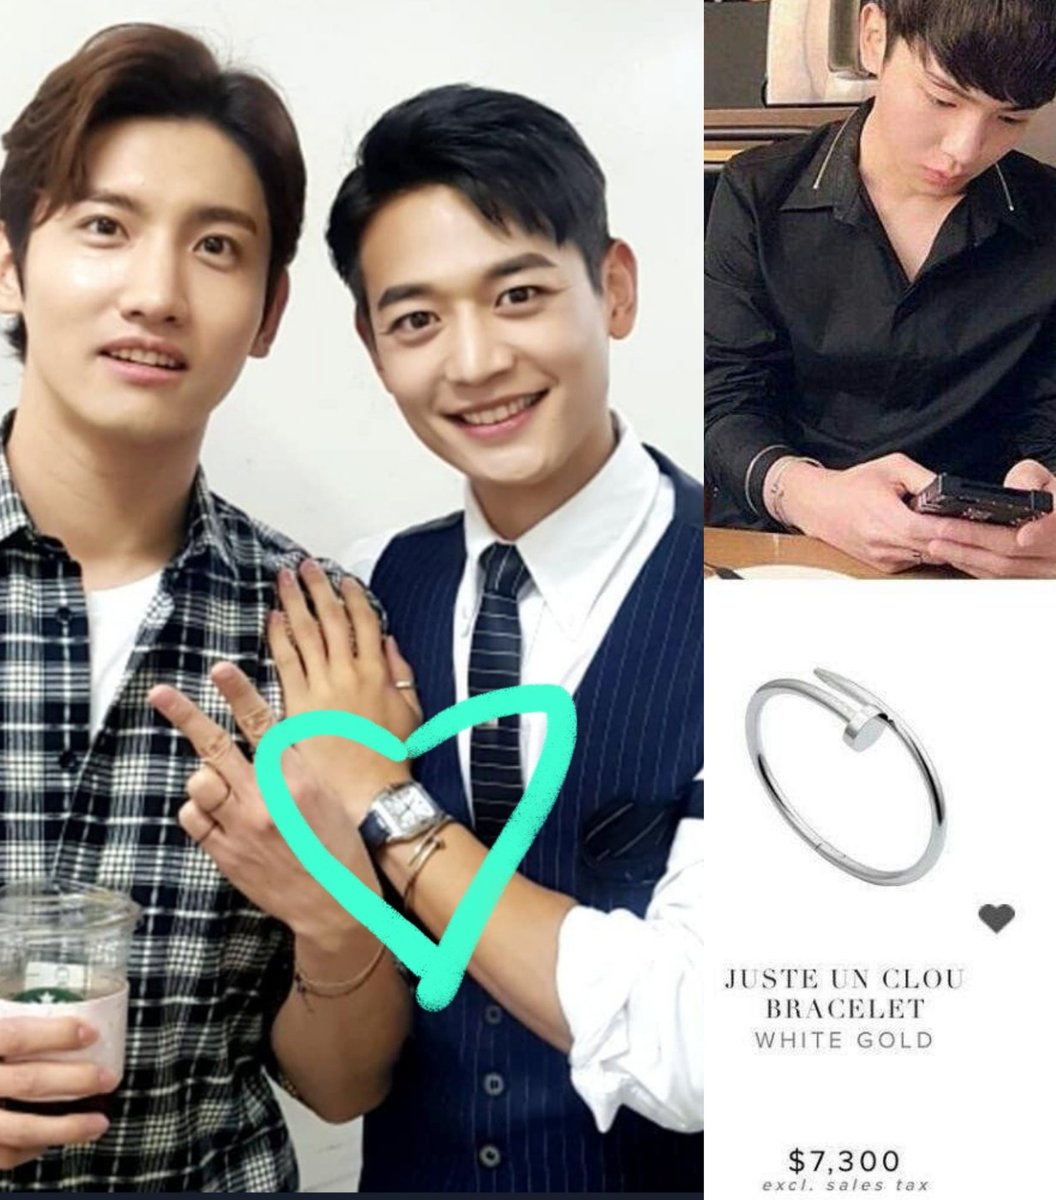 their common obsession (?) to cartierbtw minho wore this bracelet only at Best Choi’s MinhoKibum gave it to him for safekeeping or good luck? :)no thoughts head empty